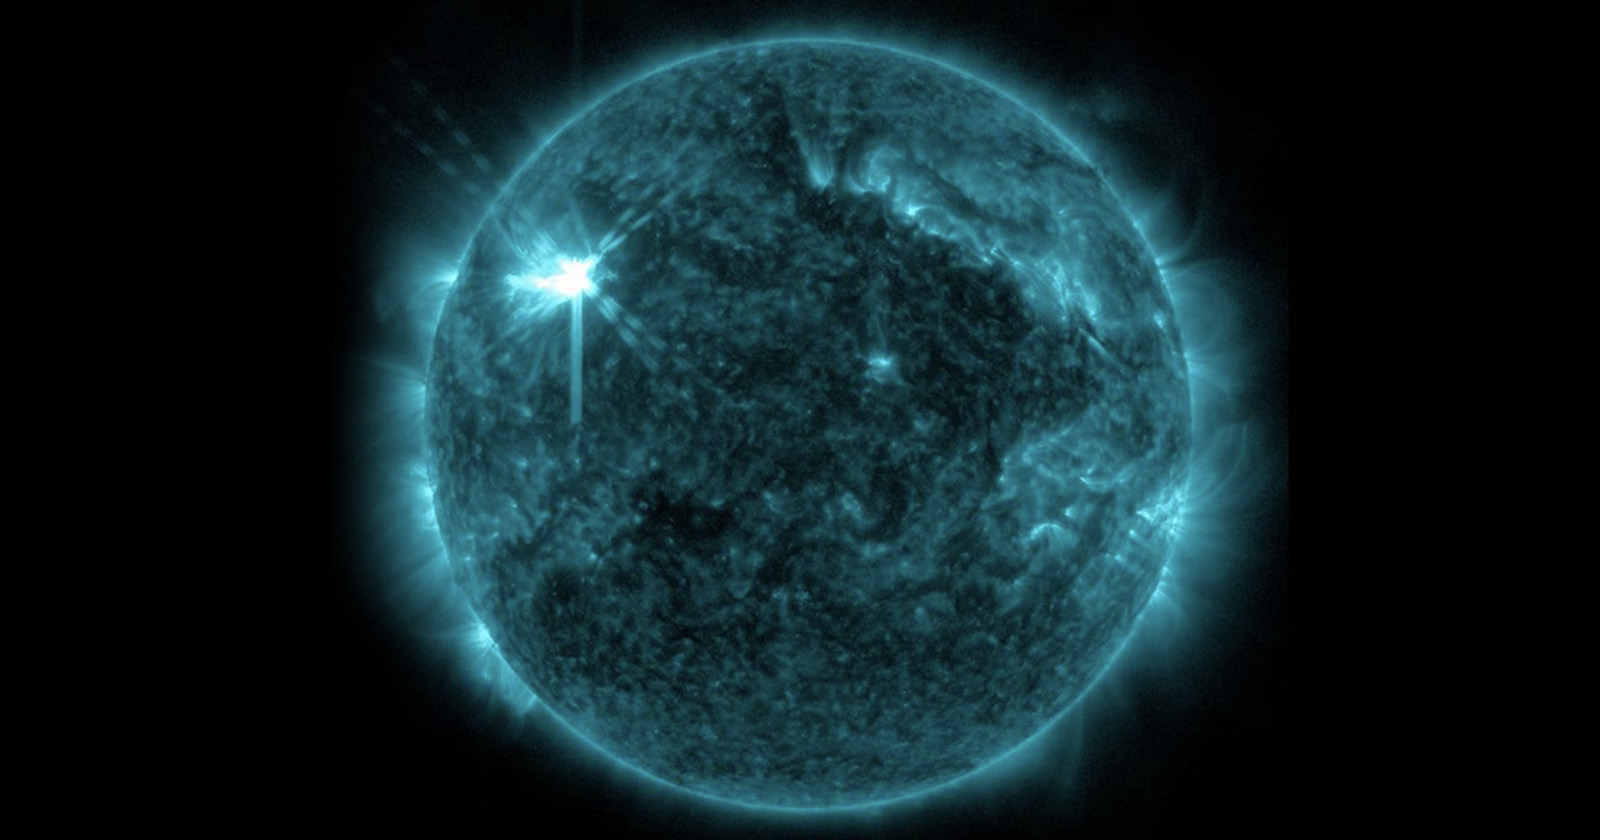 The sun is captured with a subset of extreme ultraviolet light to highlight the solar flare.